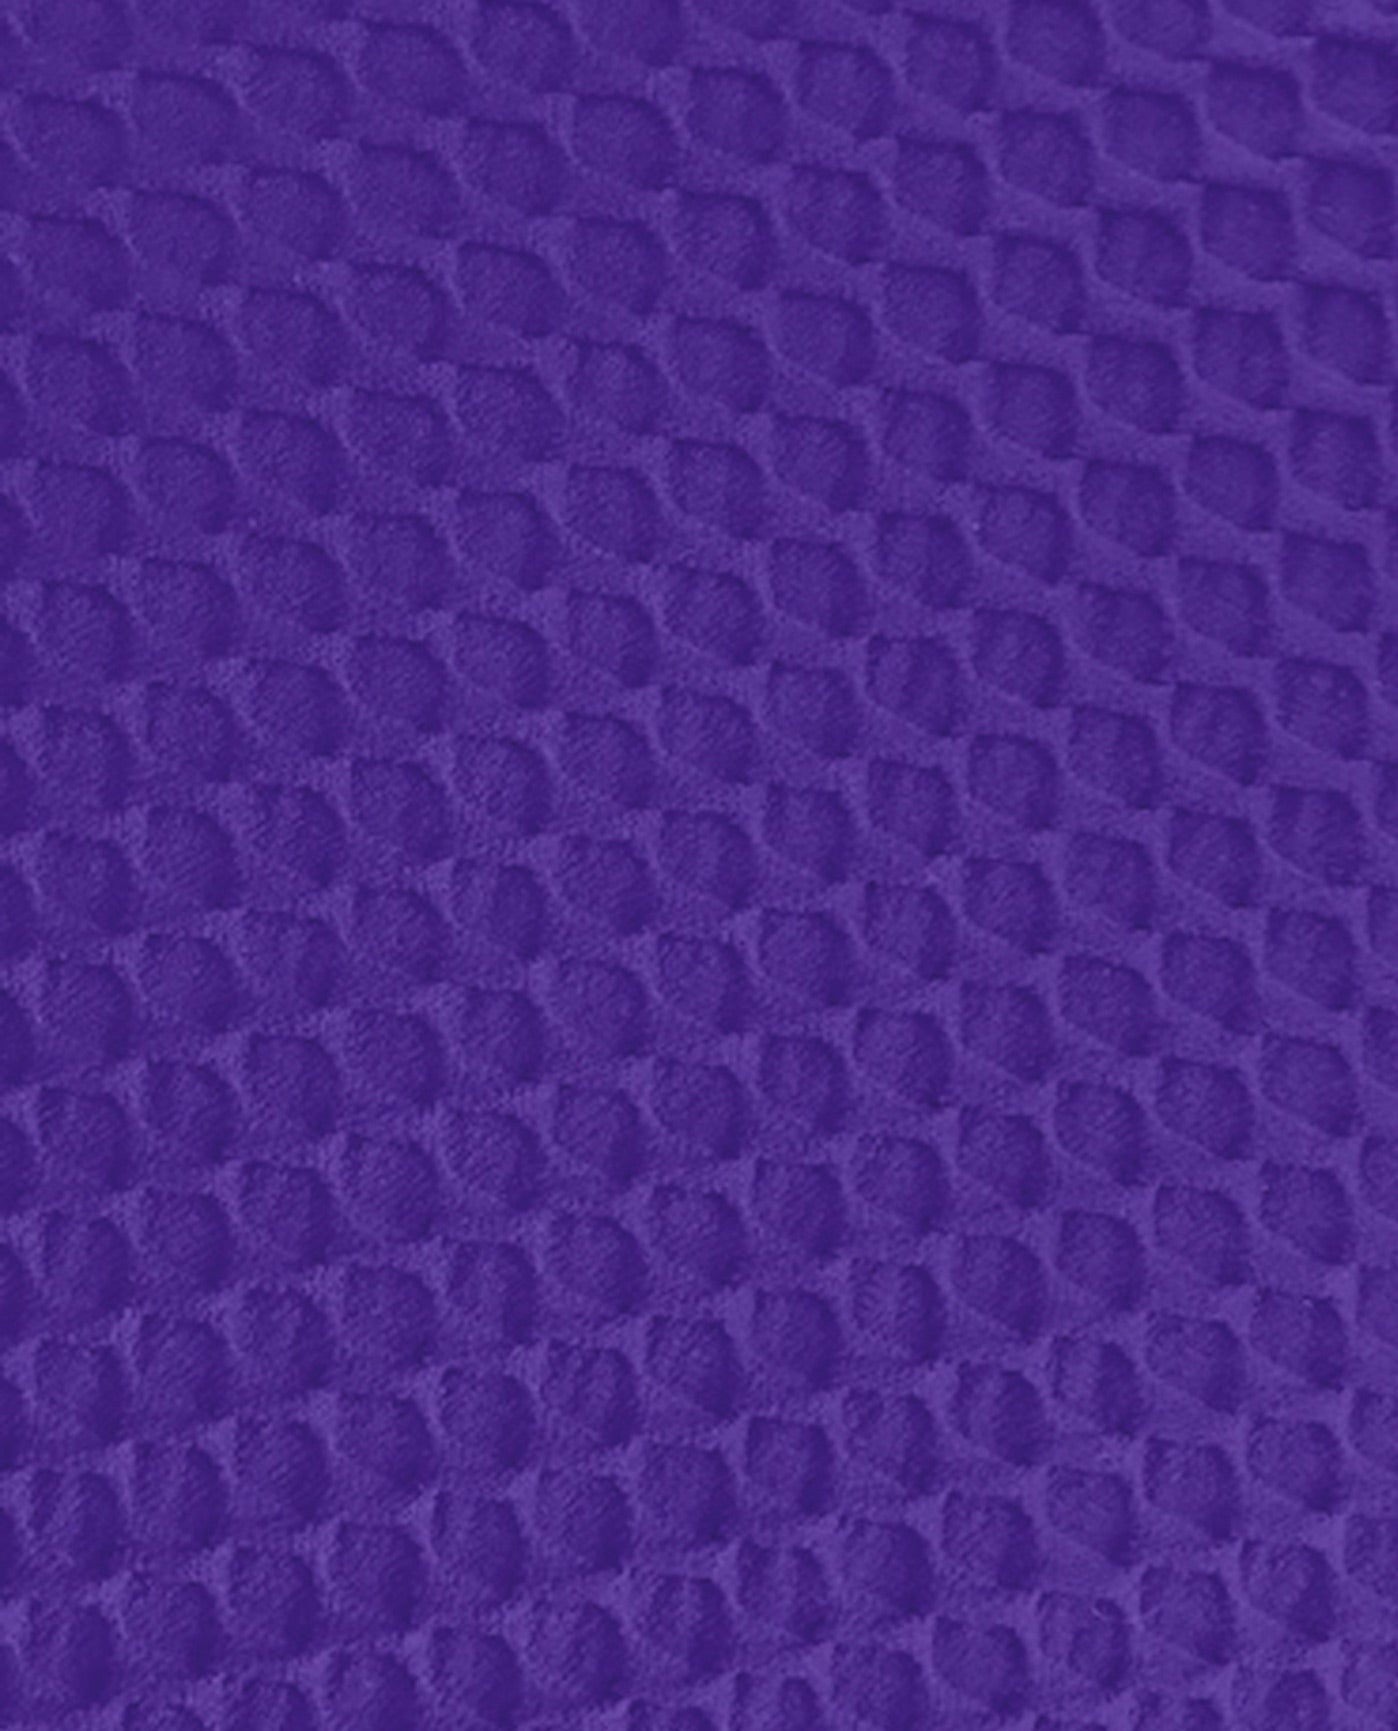 FABRIC SWATCH VIEW OF CHLORINE RESISTANT AQUAMORE COLOR BLOCK TEXTURED HIGH NECK PLUS SIZE SWIMSUIT | 608 AQT TEXTURED PURPLE